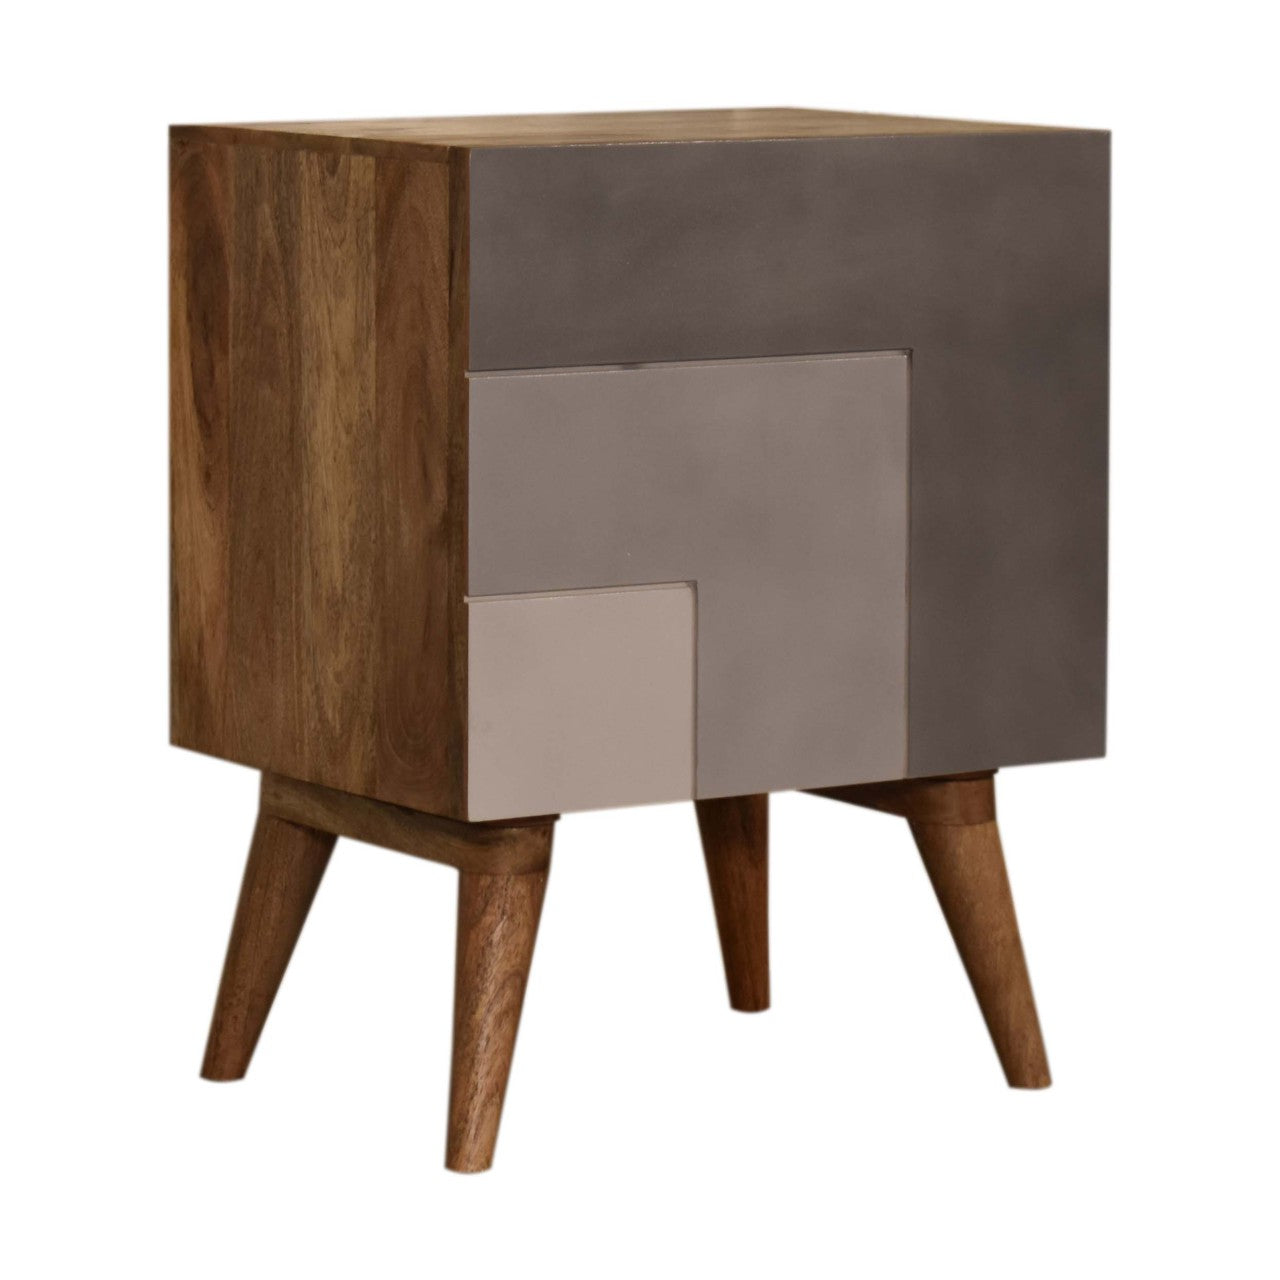 Montcalm Bedside Table, Mango Wood & 3 Shades Grey Painted - Broxle